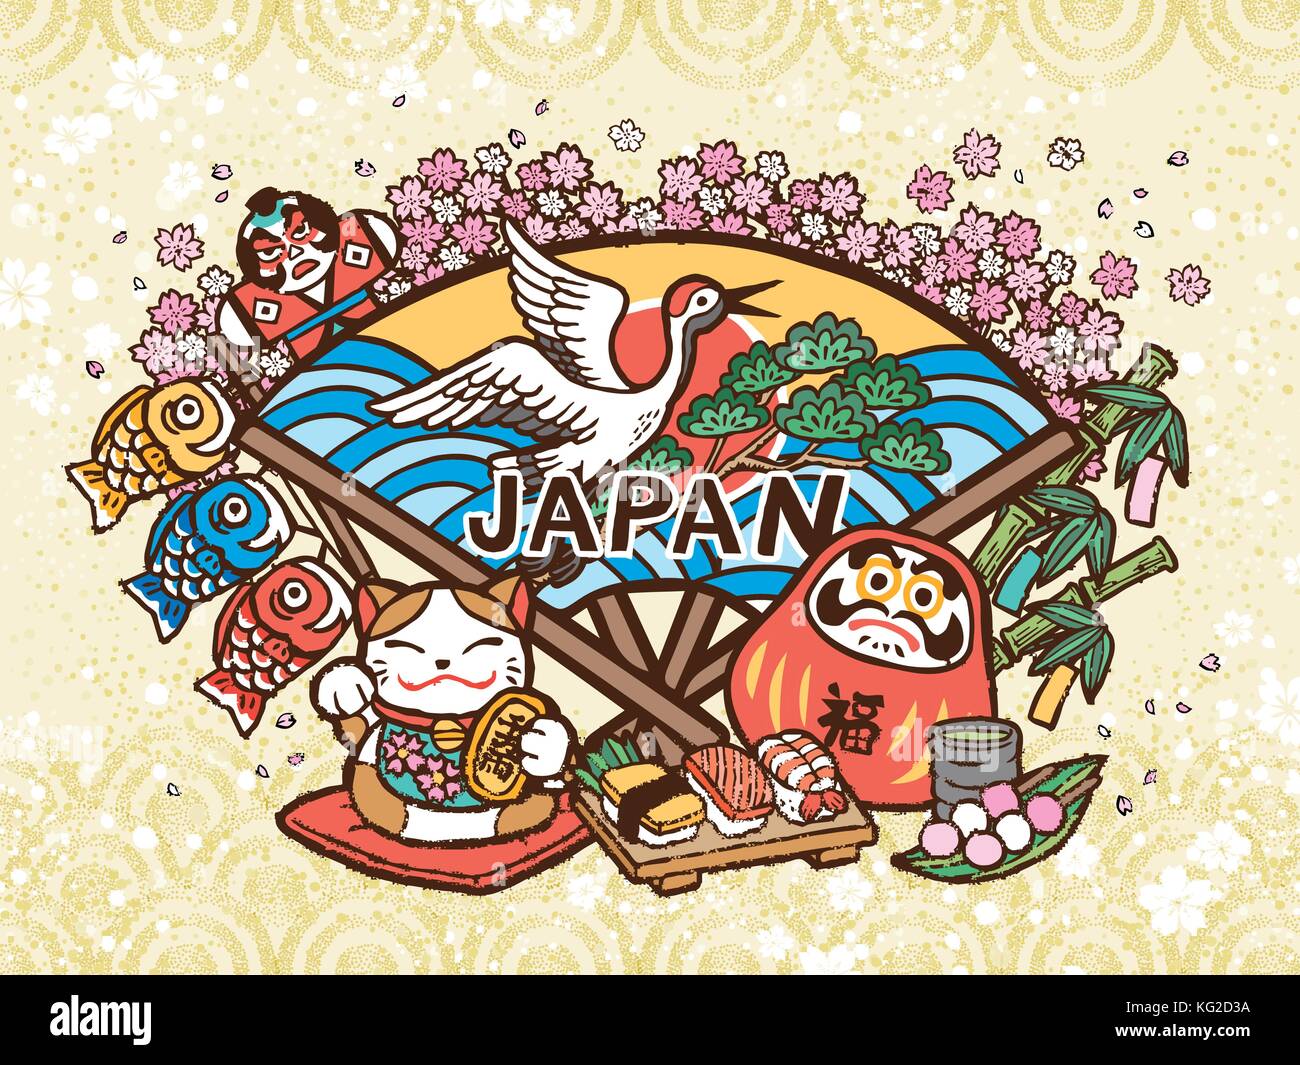 Lovely Japan concept illustration, hand drawn style with traditional symbol collection, fortune word in Japanese on the red daruma Stock Vector